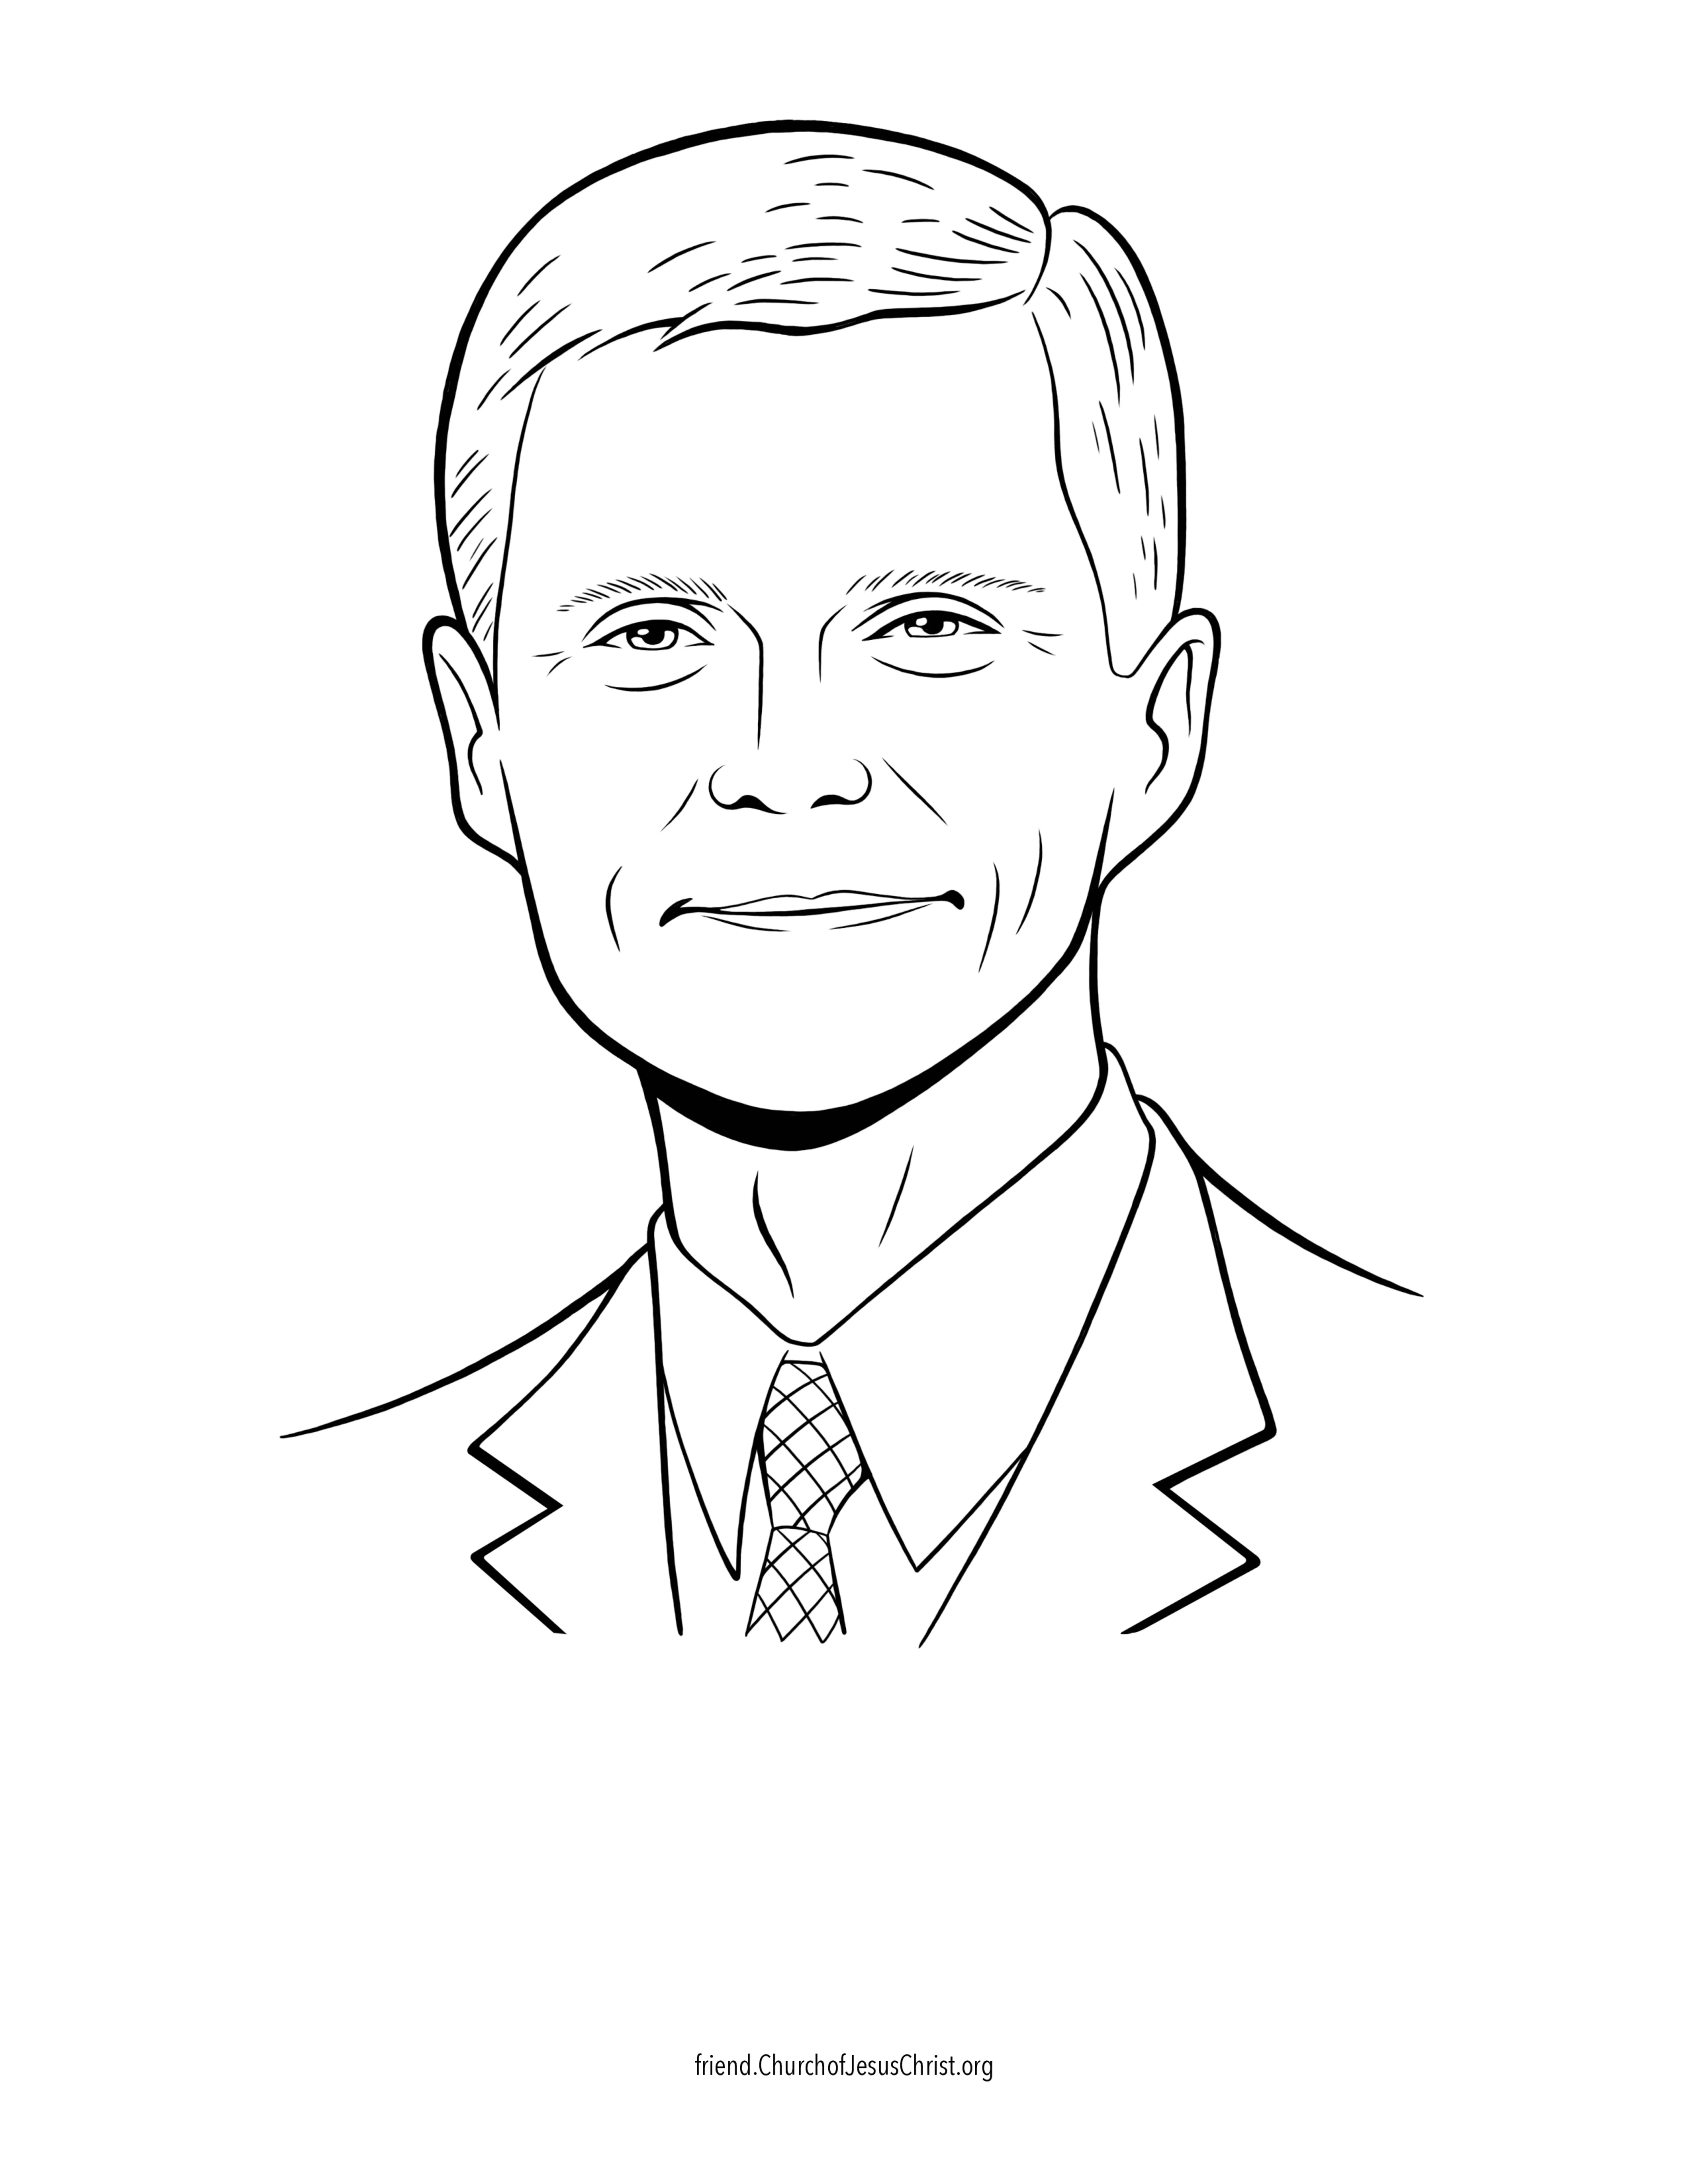 A coloring page of the official portrait of David A. Bednar.